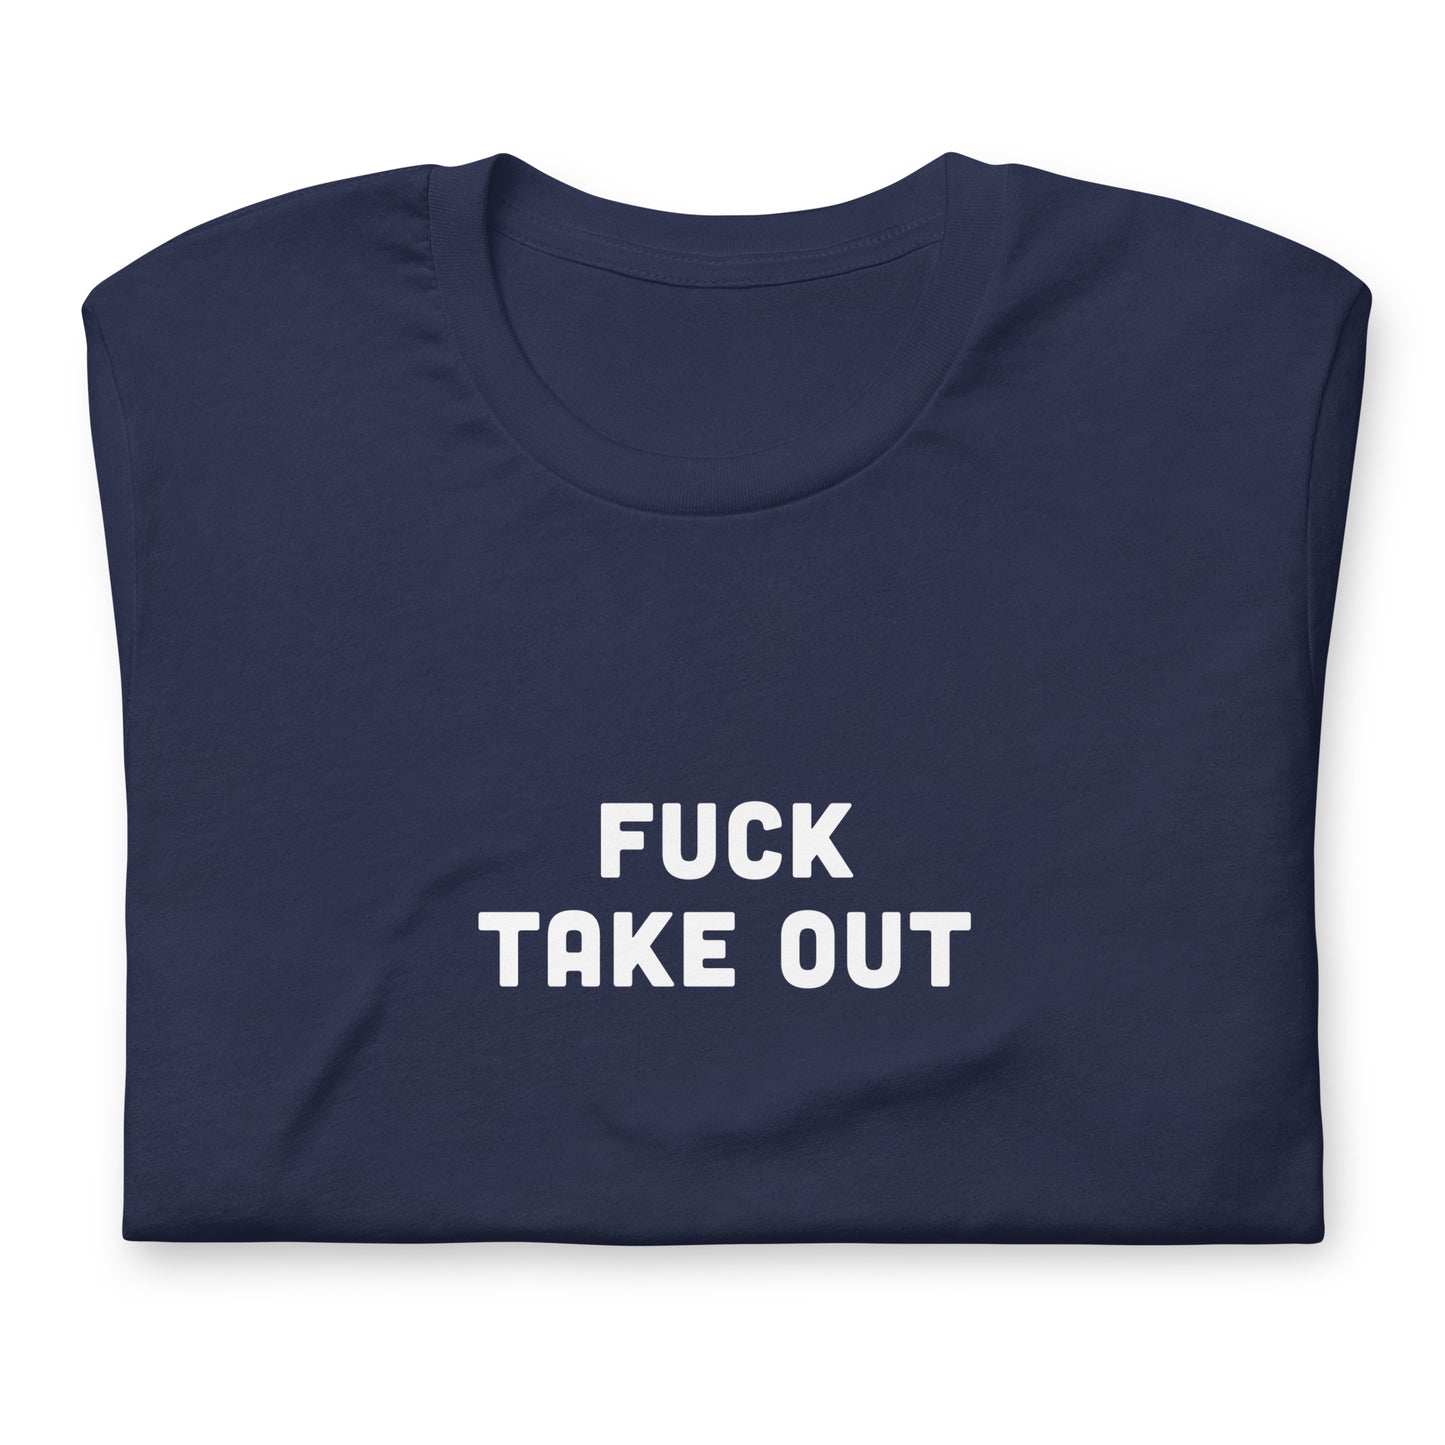 Fuck Take Out T-Shirt Size S Color Black